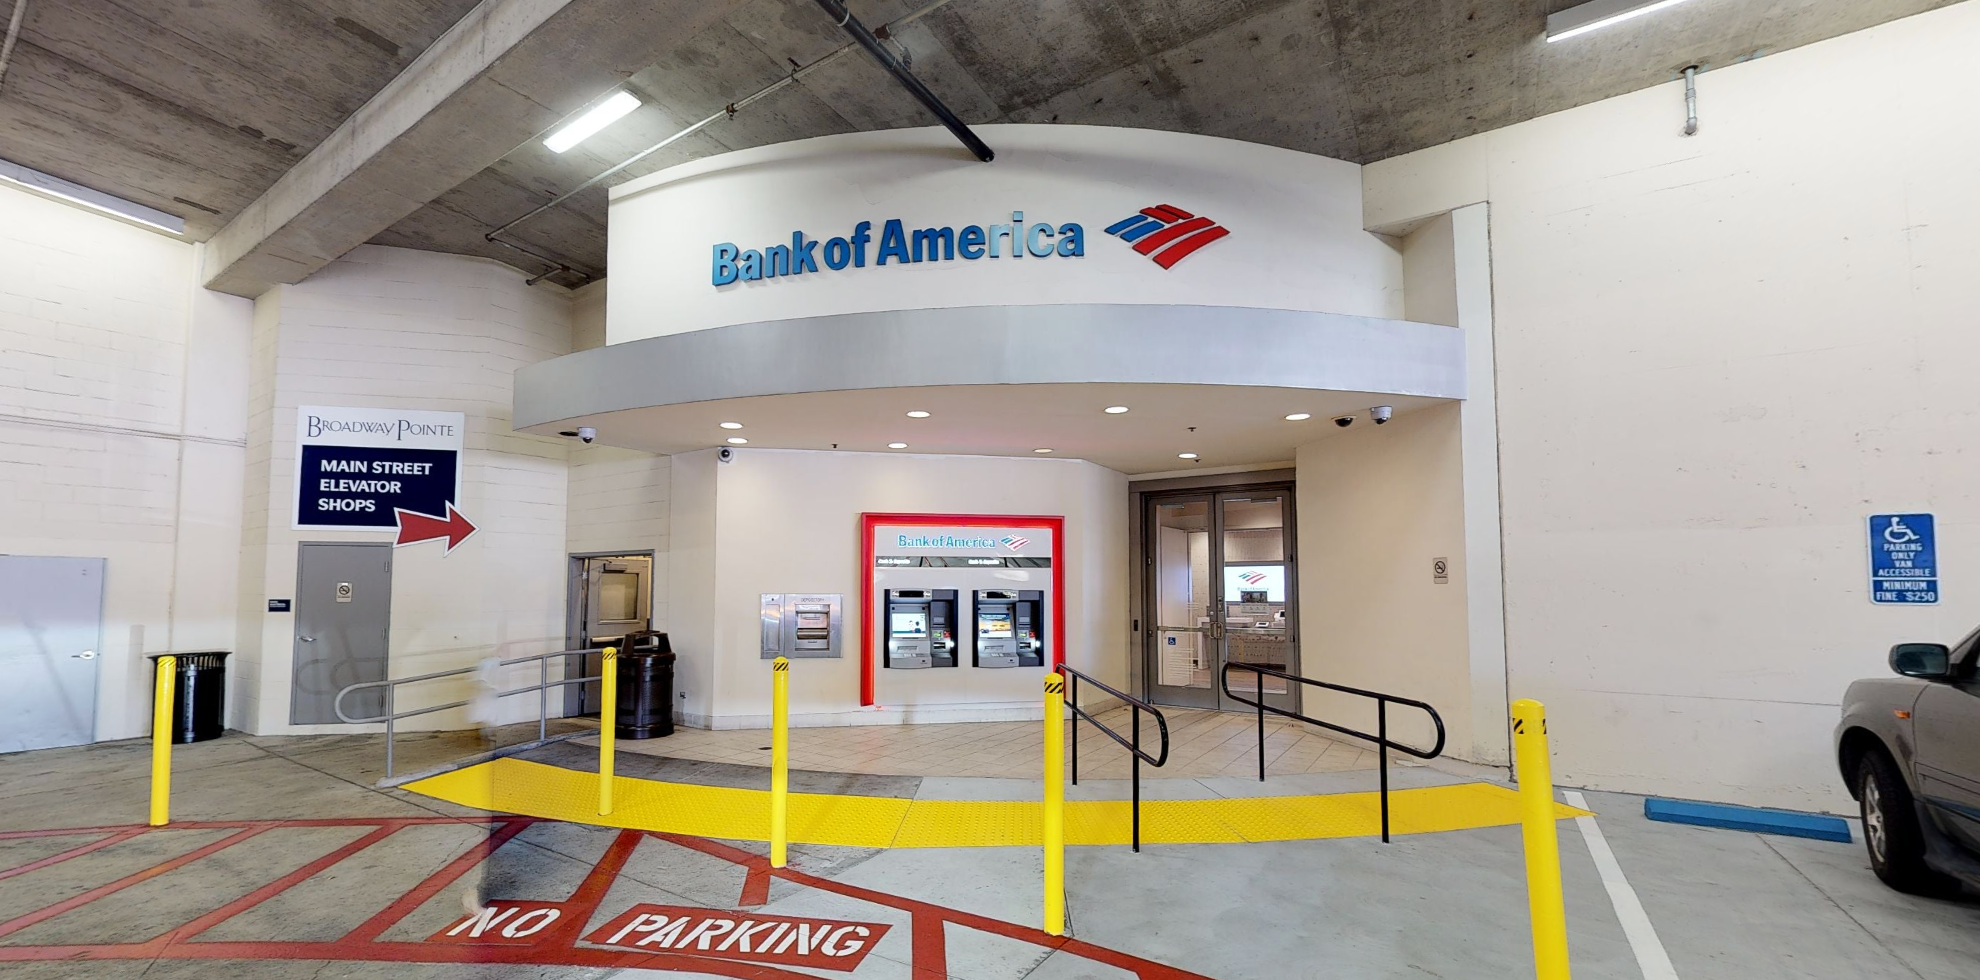 Bank of America financial center with walk-up ATM | 1330 N Main St, Walnut Creek, CA 94596